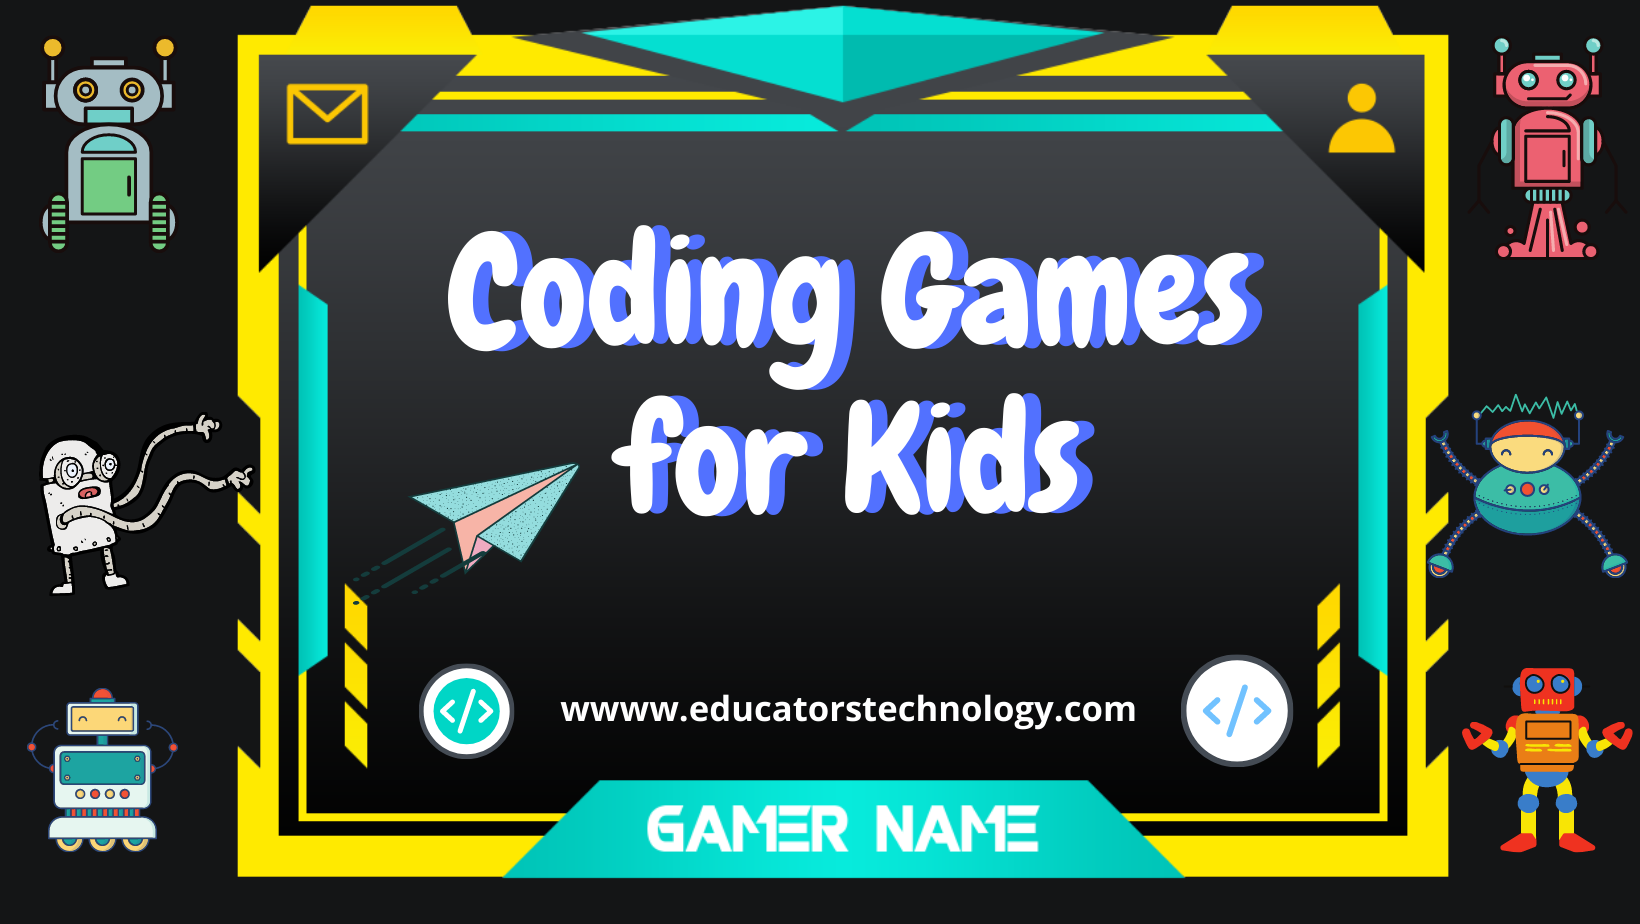 Existing educational games for computer programming